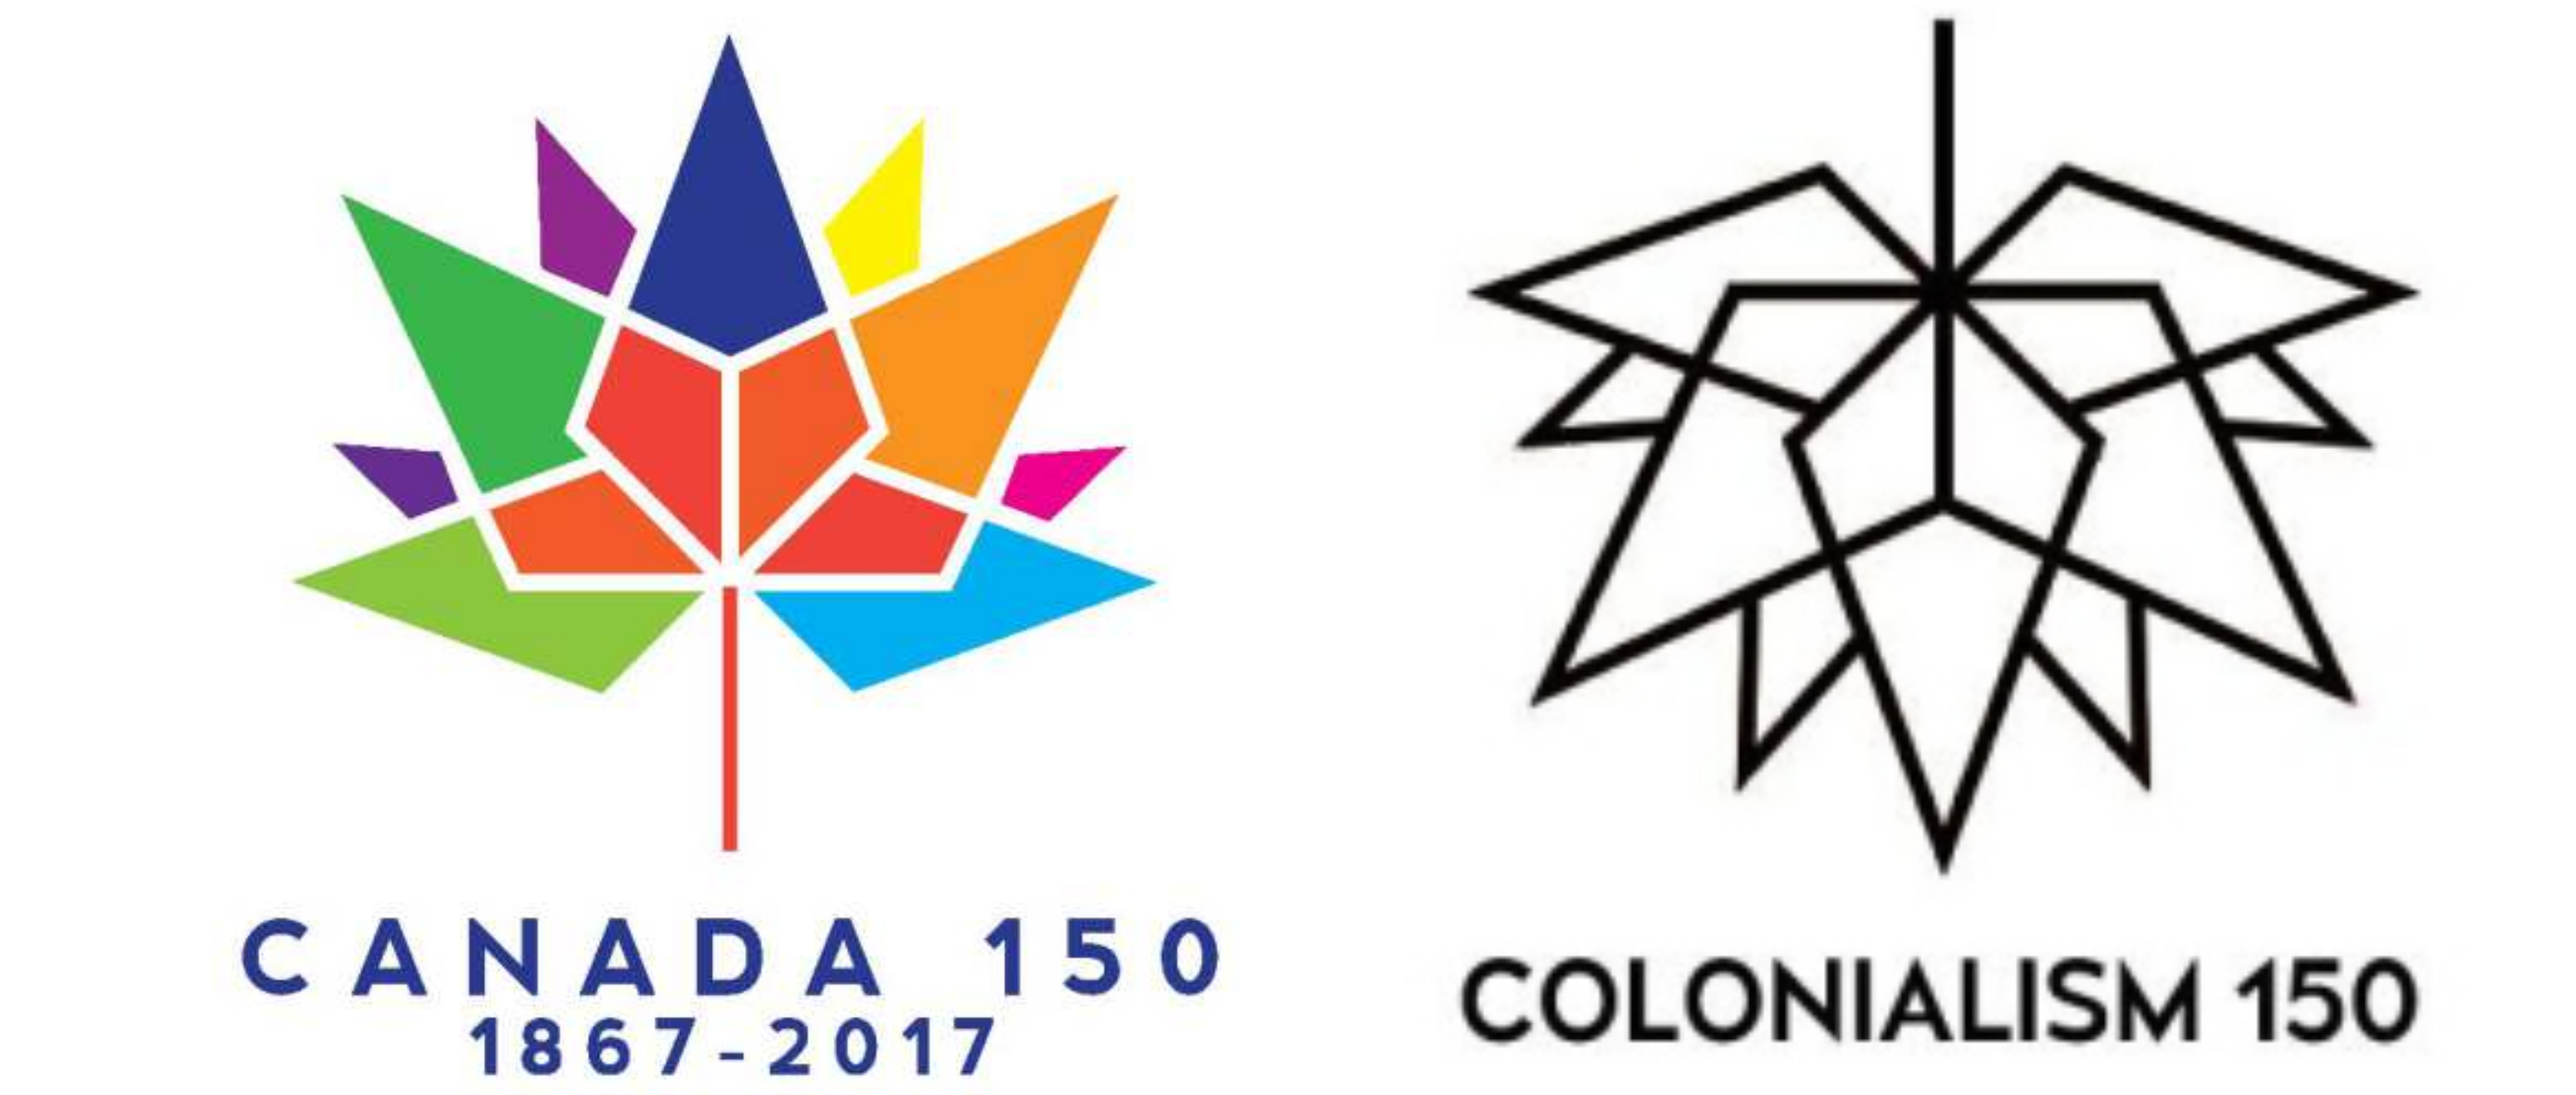 On the left, the logo for 'Canada 150.' On the right, the design for 'Colonialism 150.'